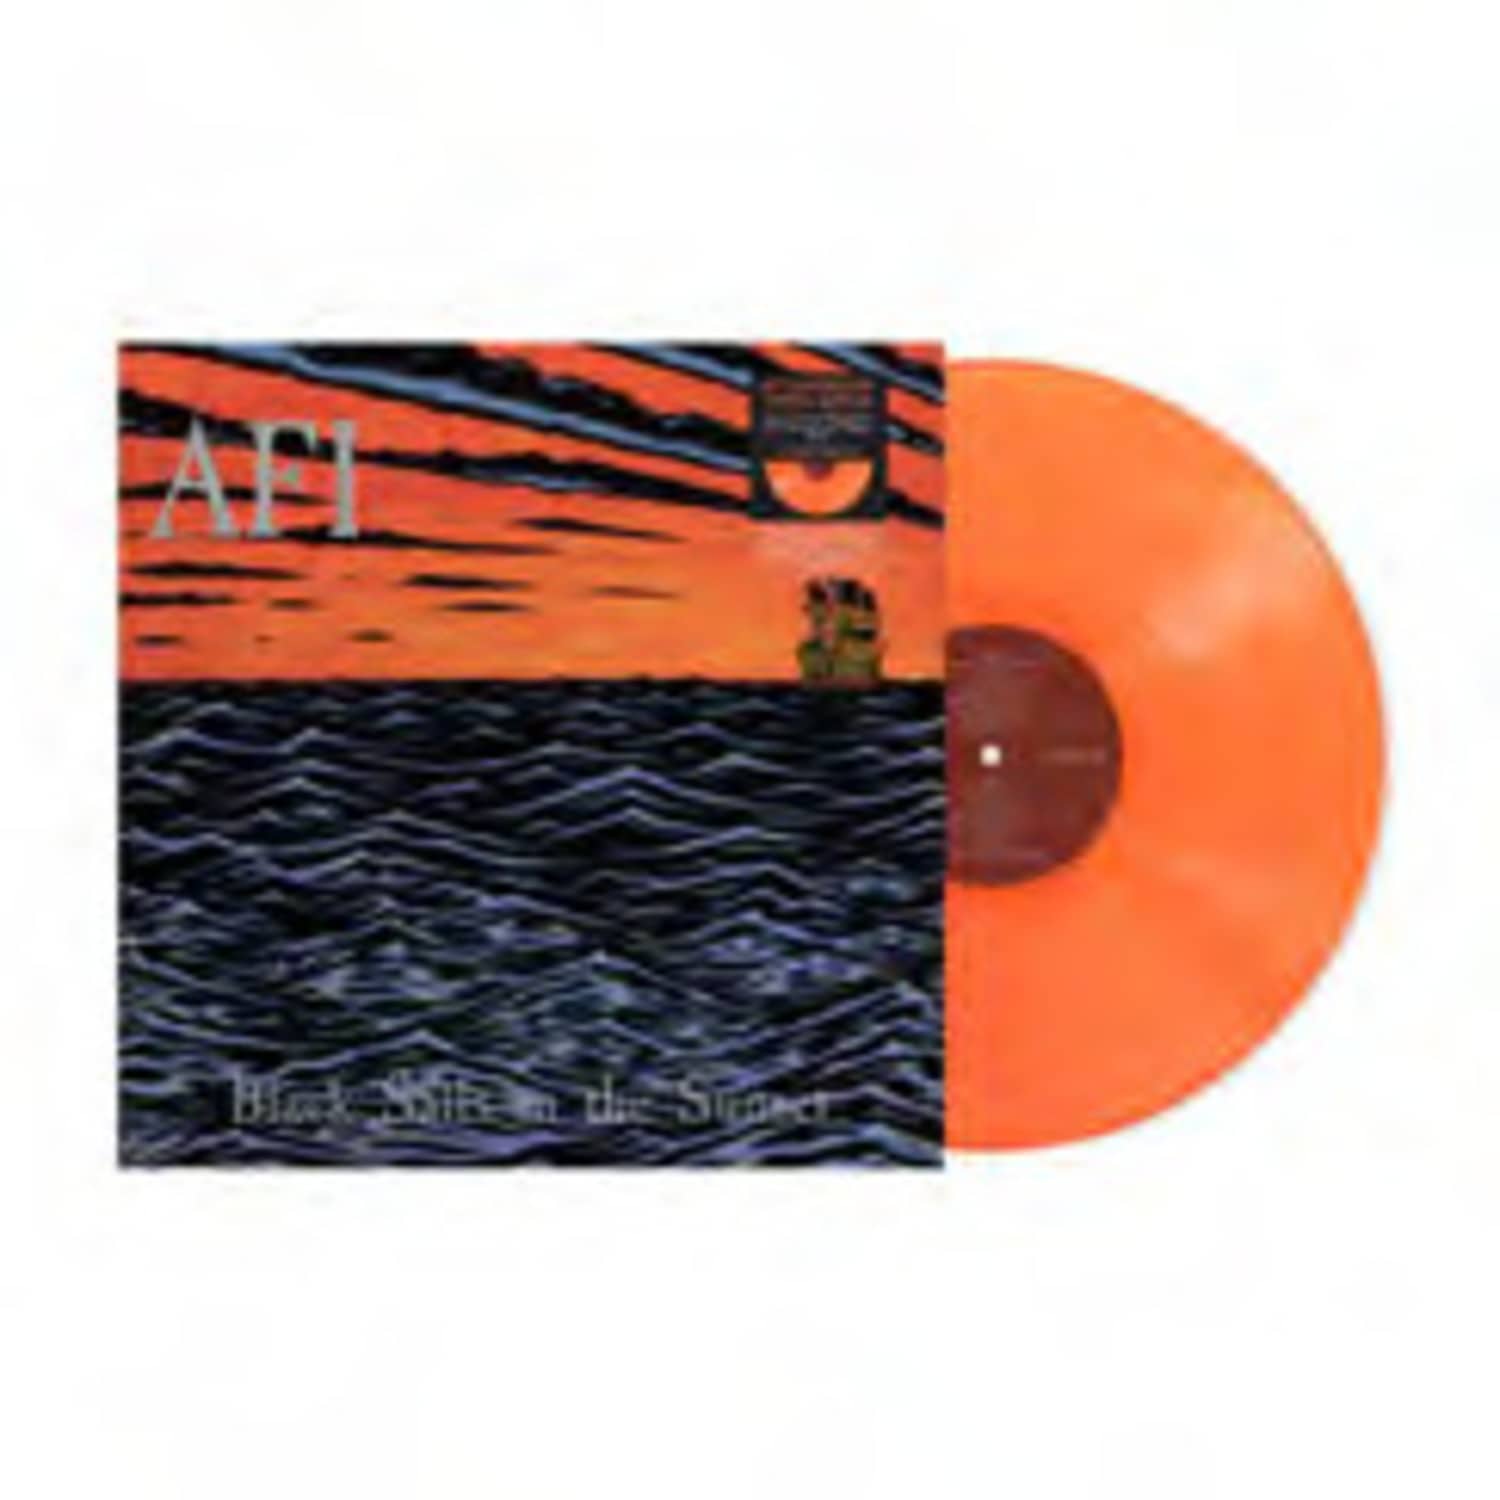 Afi - BLACK SAILS IN THE SUNSET 